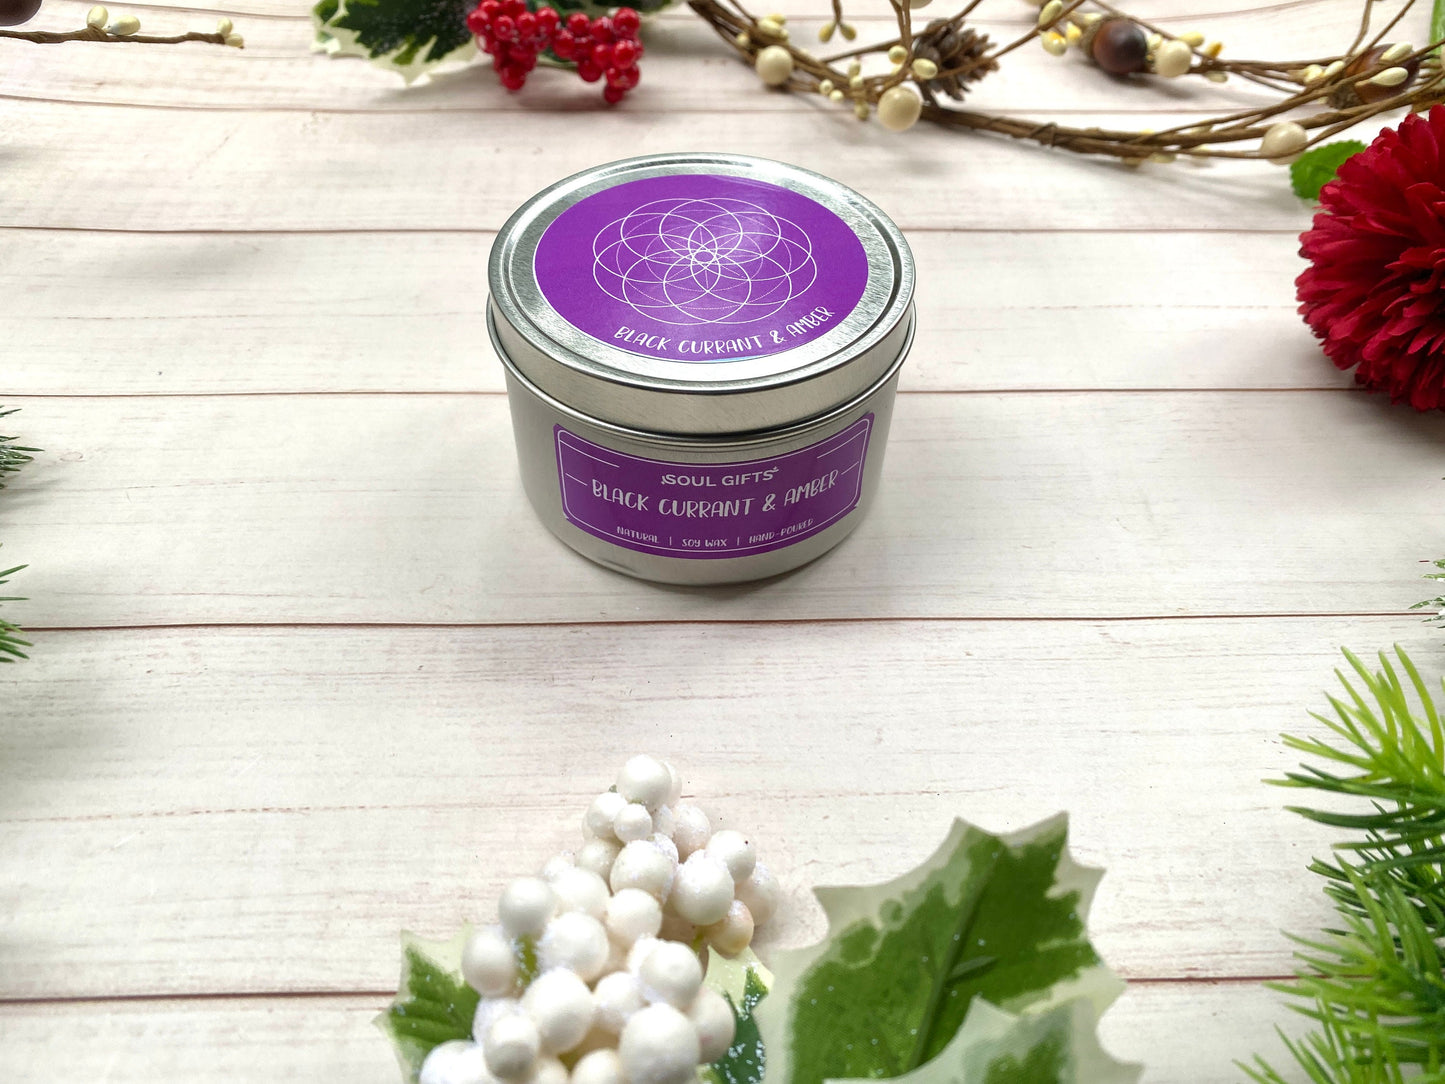 Black Currant Amber Candle - Soul Gifts Soy Candle - 8oz Tin Candle